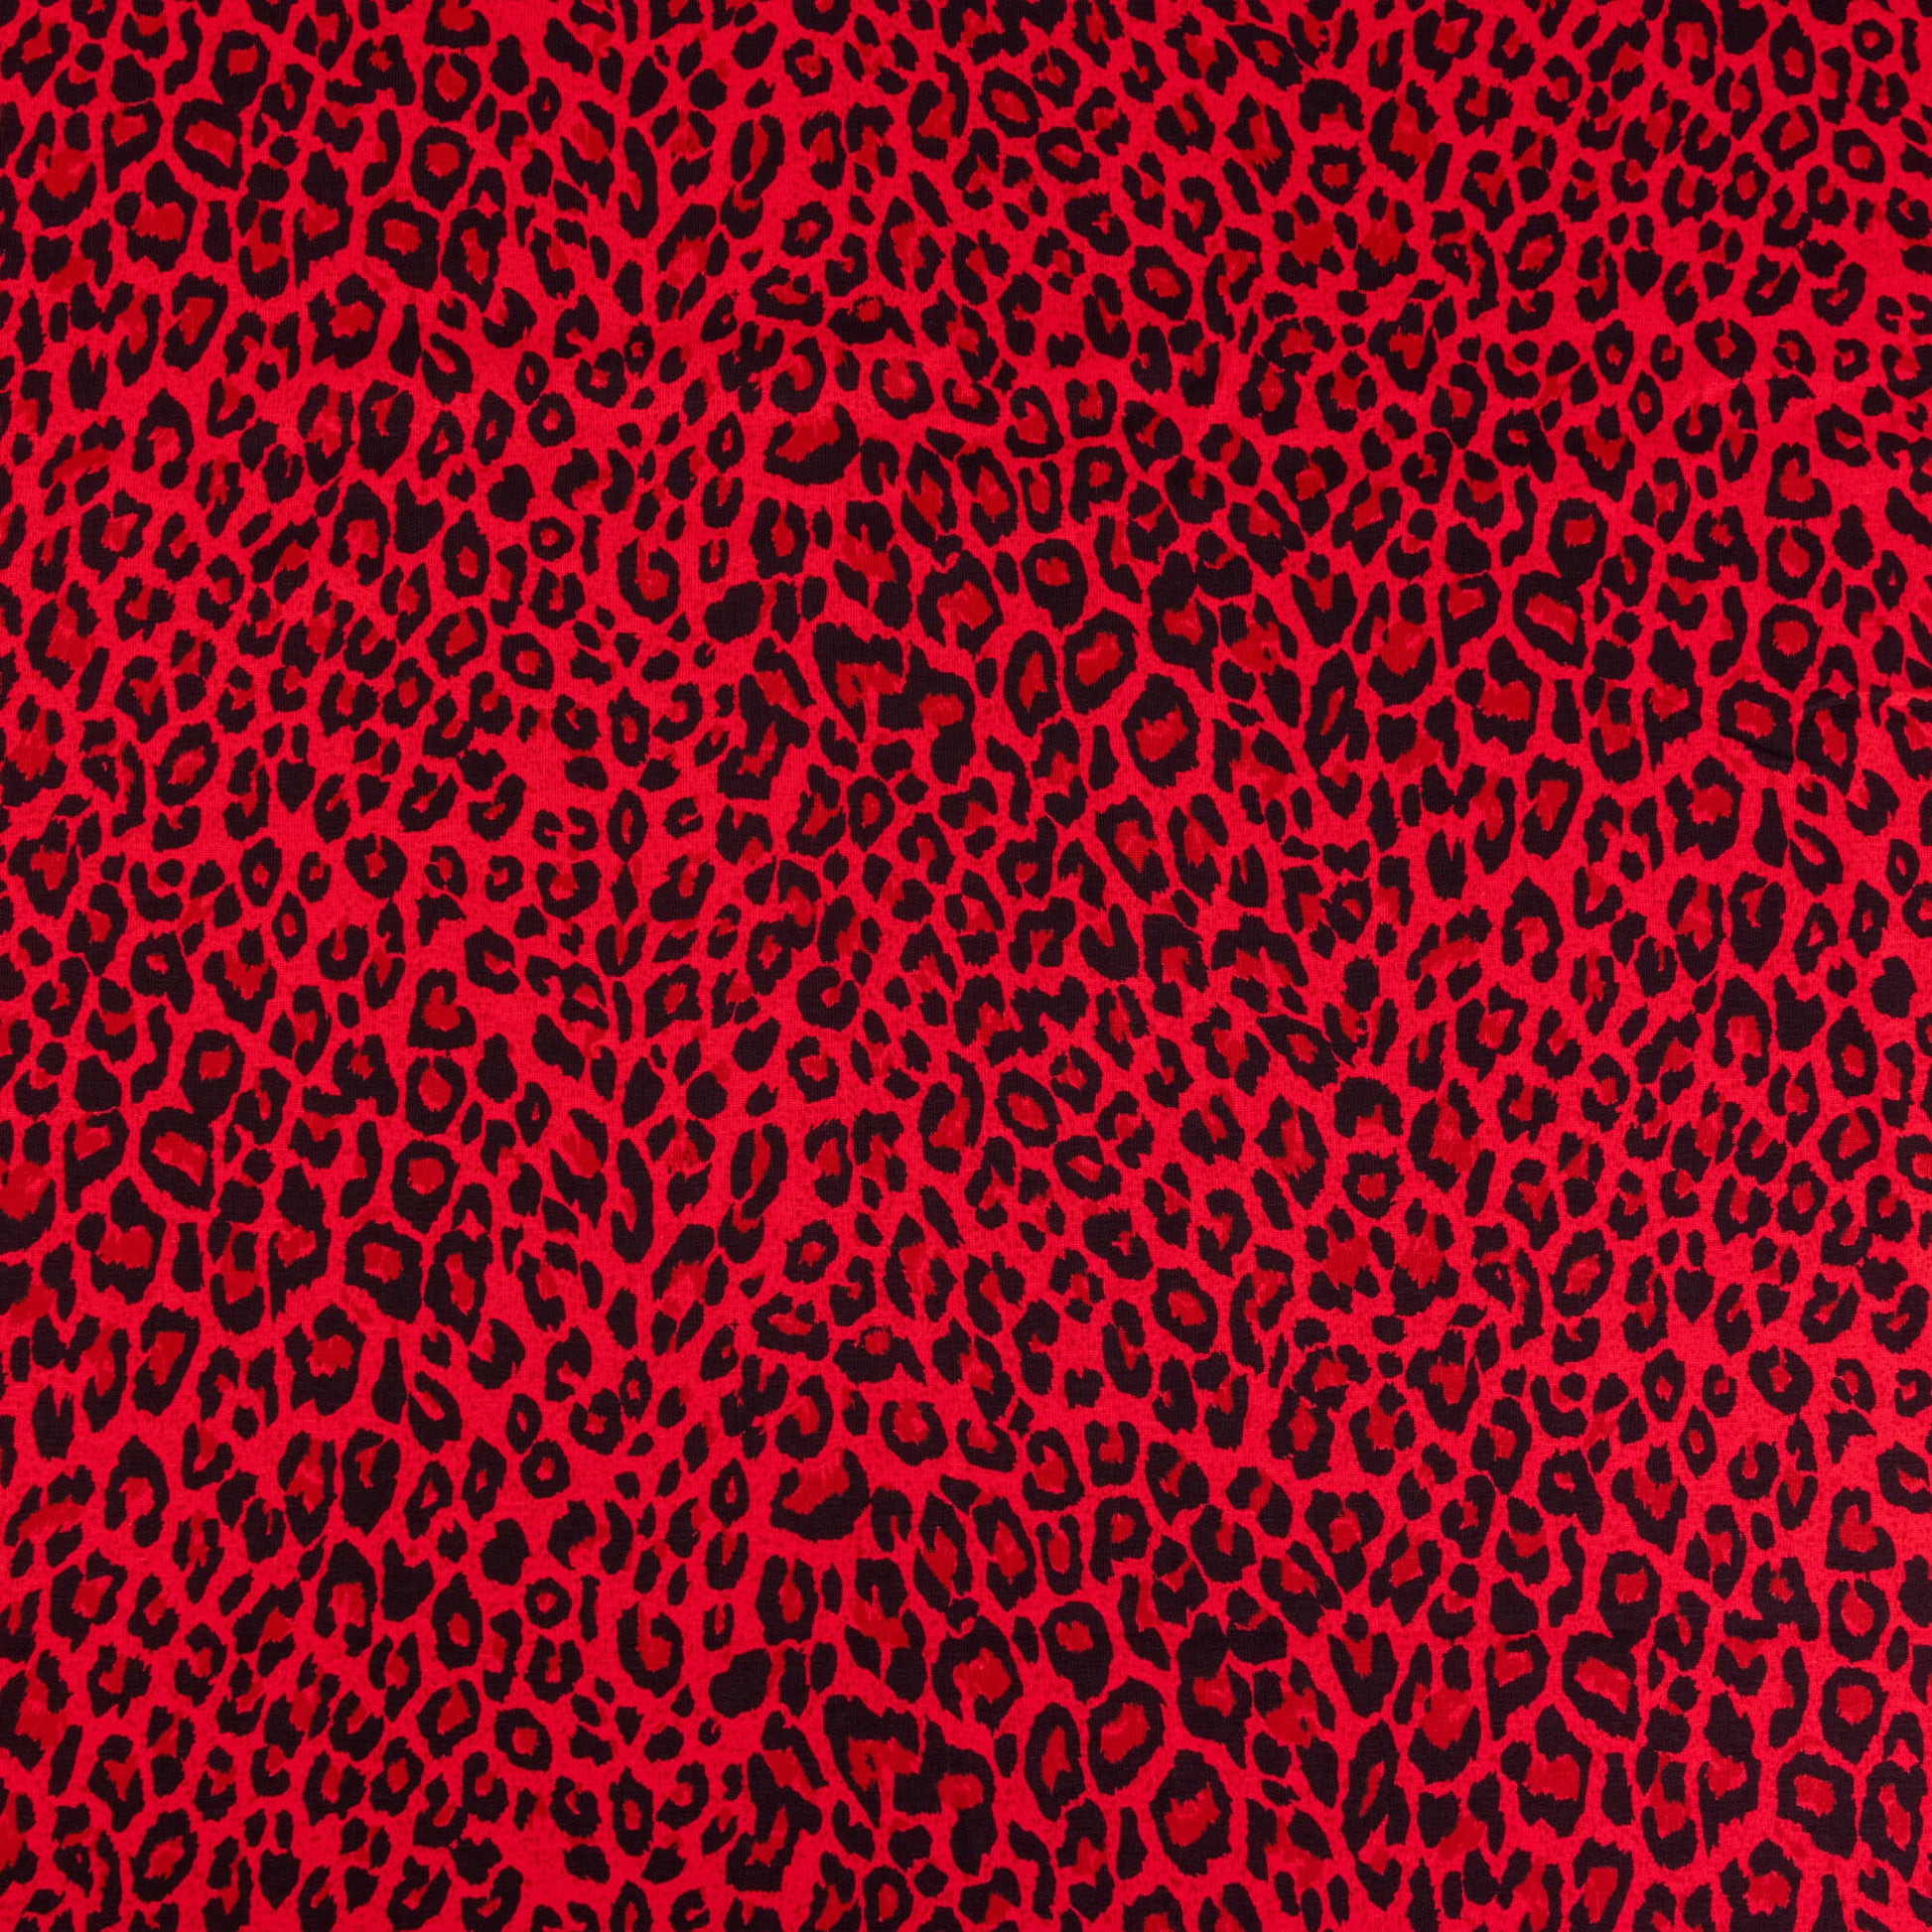 A wide of bright red and black leopard print fabric in a soft jersey t-shirt weight perfect for crafting